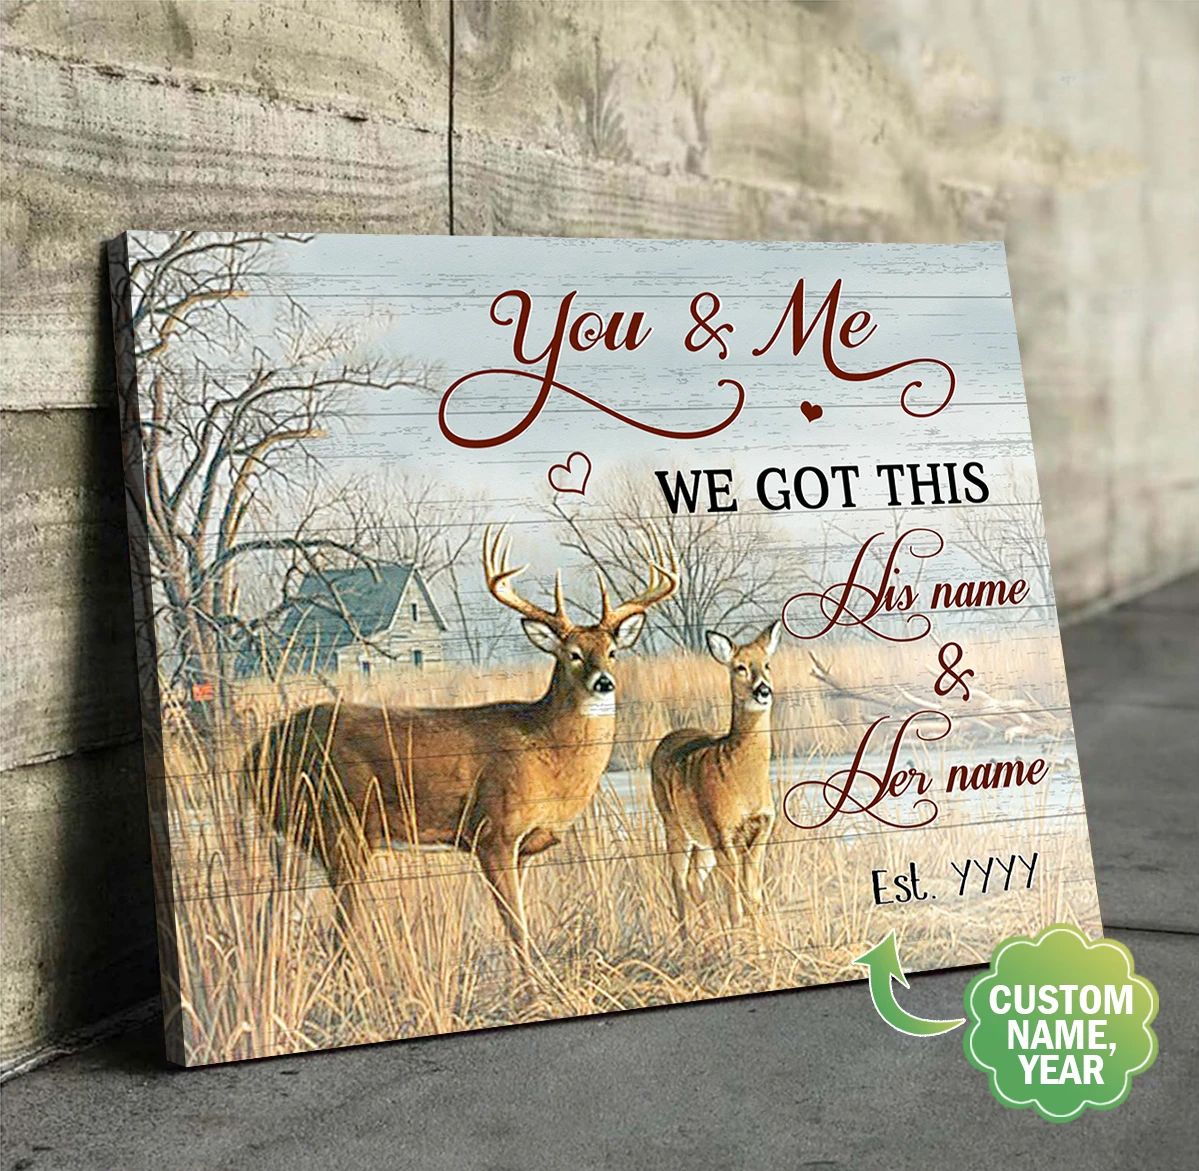 Personalized Valentine Day Gifts For Couple Deer Love Canvas You And Me We Got This PAN